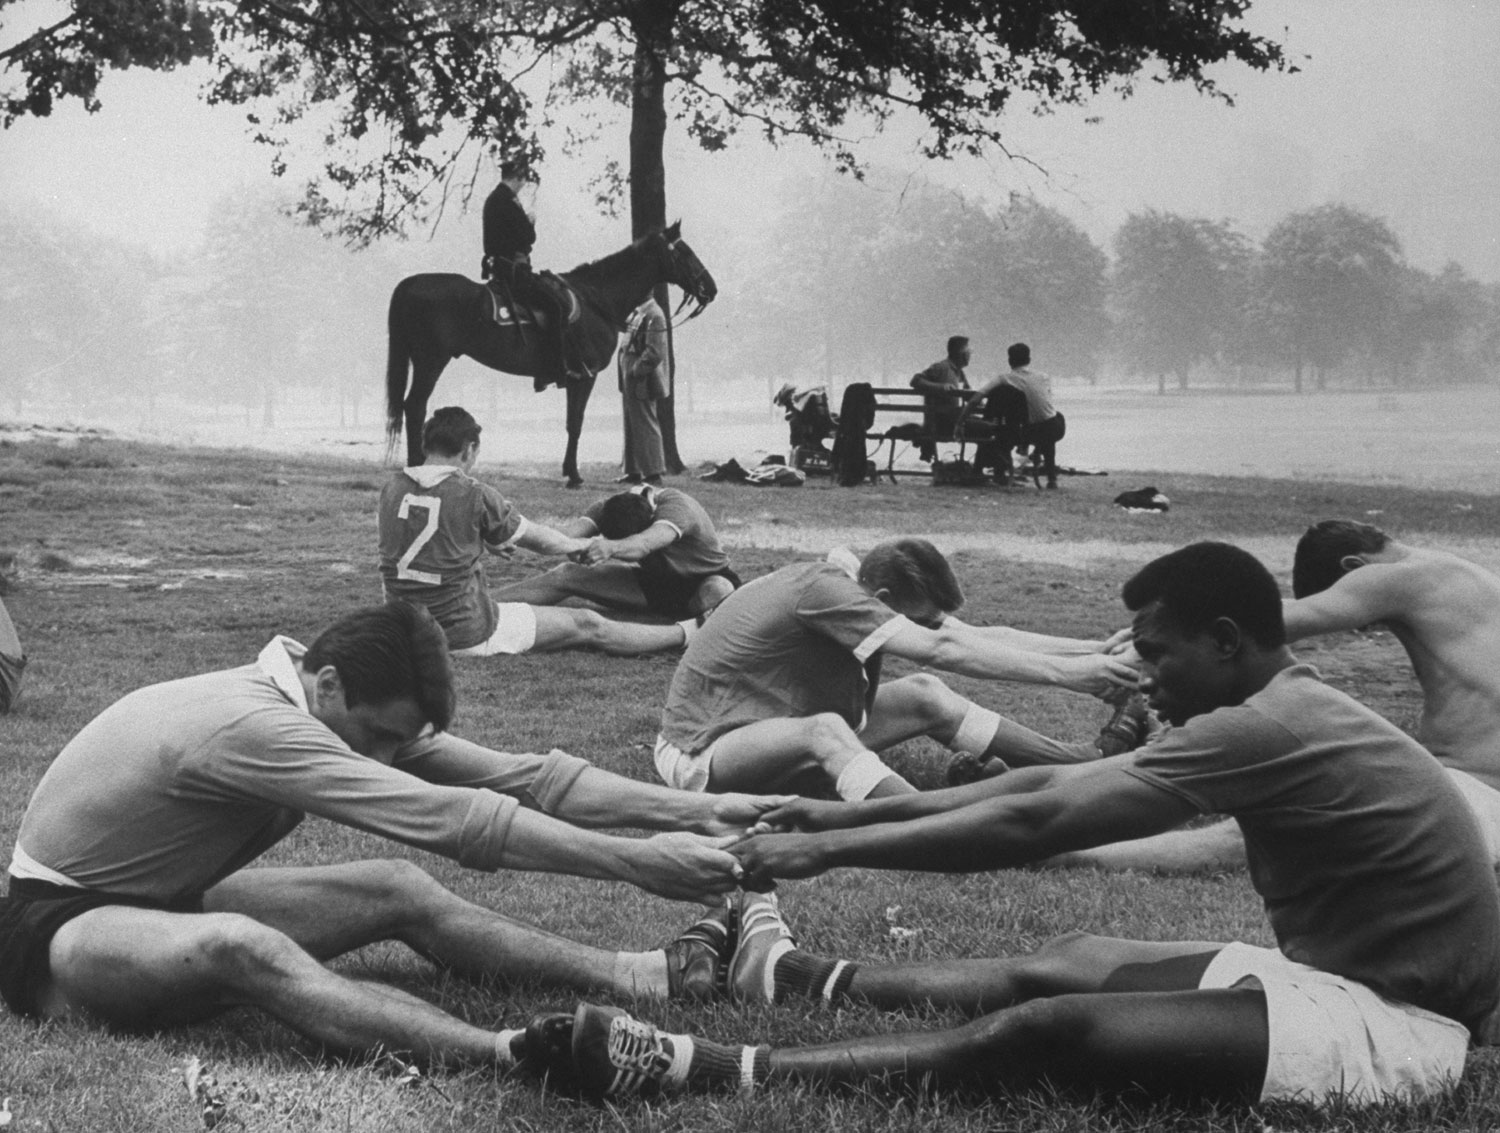 Warming up before a soccer match, Central Park, 1961.